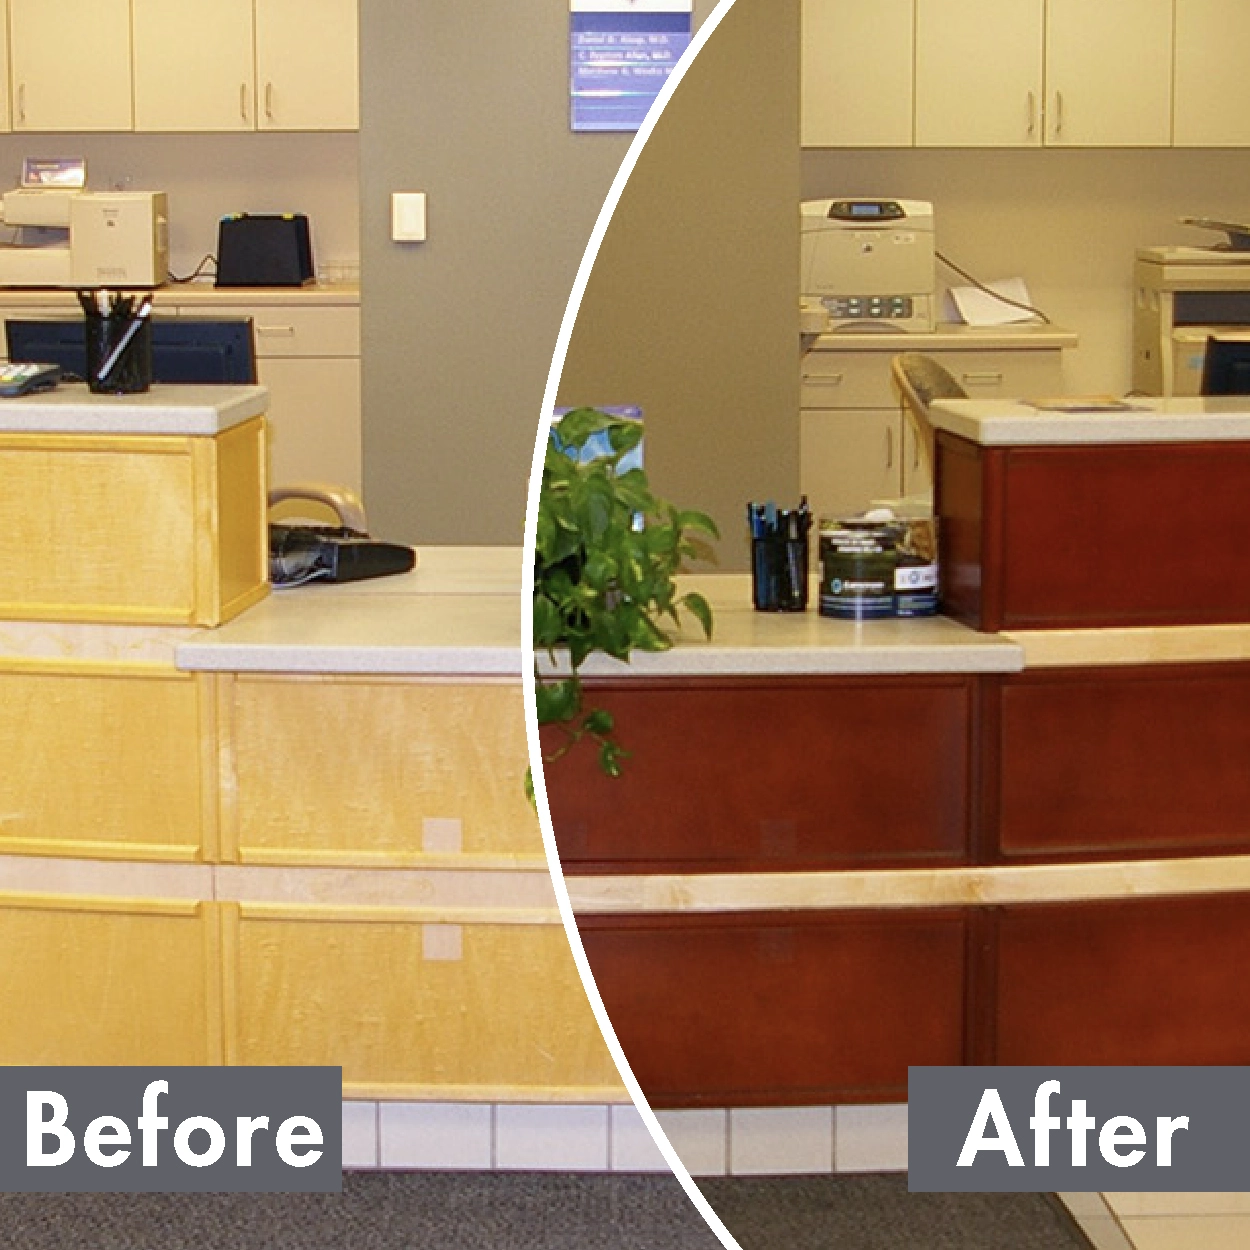 On the left, a photo of an unrefinished office reception desk in a light wood color before N-Hance refinishing. On the right, a photo of the refinished office reception desk after N-Hance refinishing work in a dark wood color.